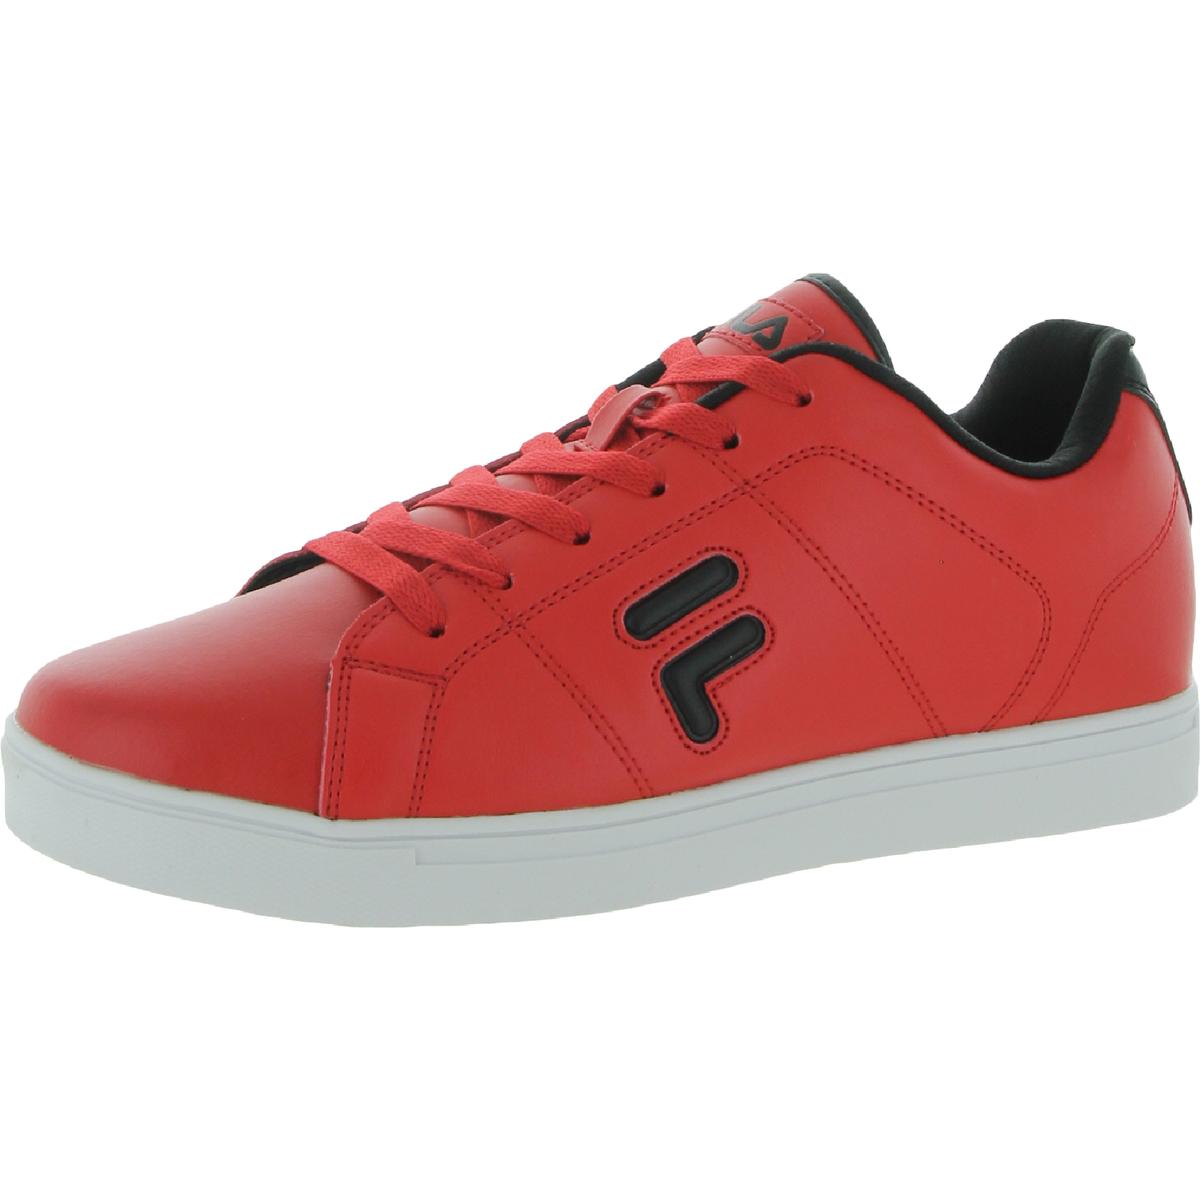 Fila Mens Lifestyle Low Trainers Fashion Sneakers Shoes 9411 | eBay